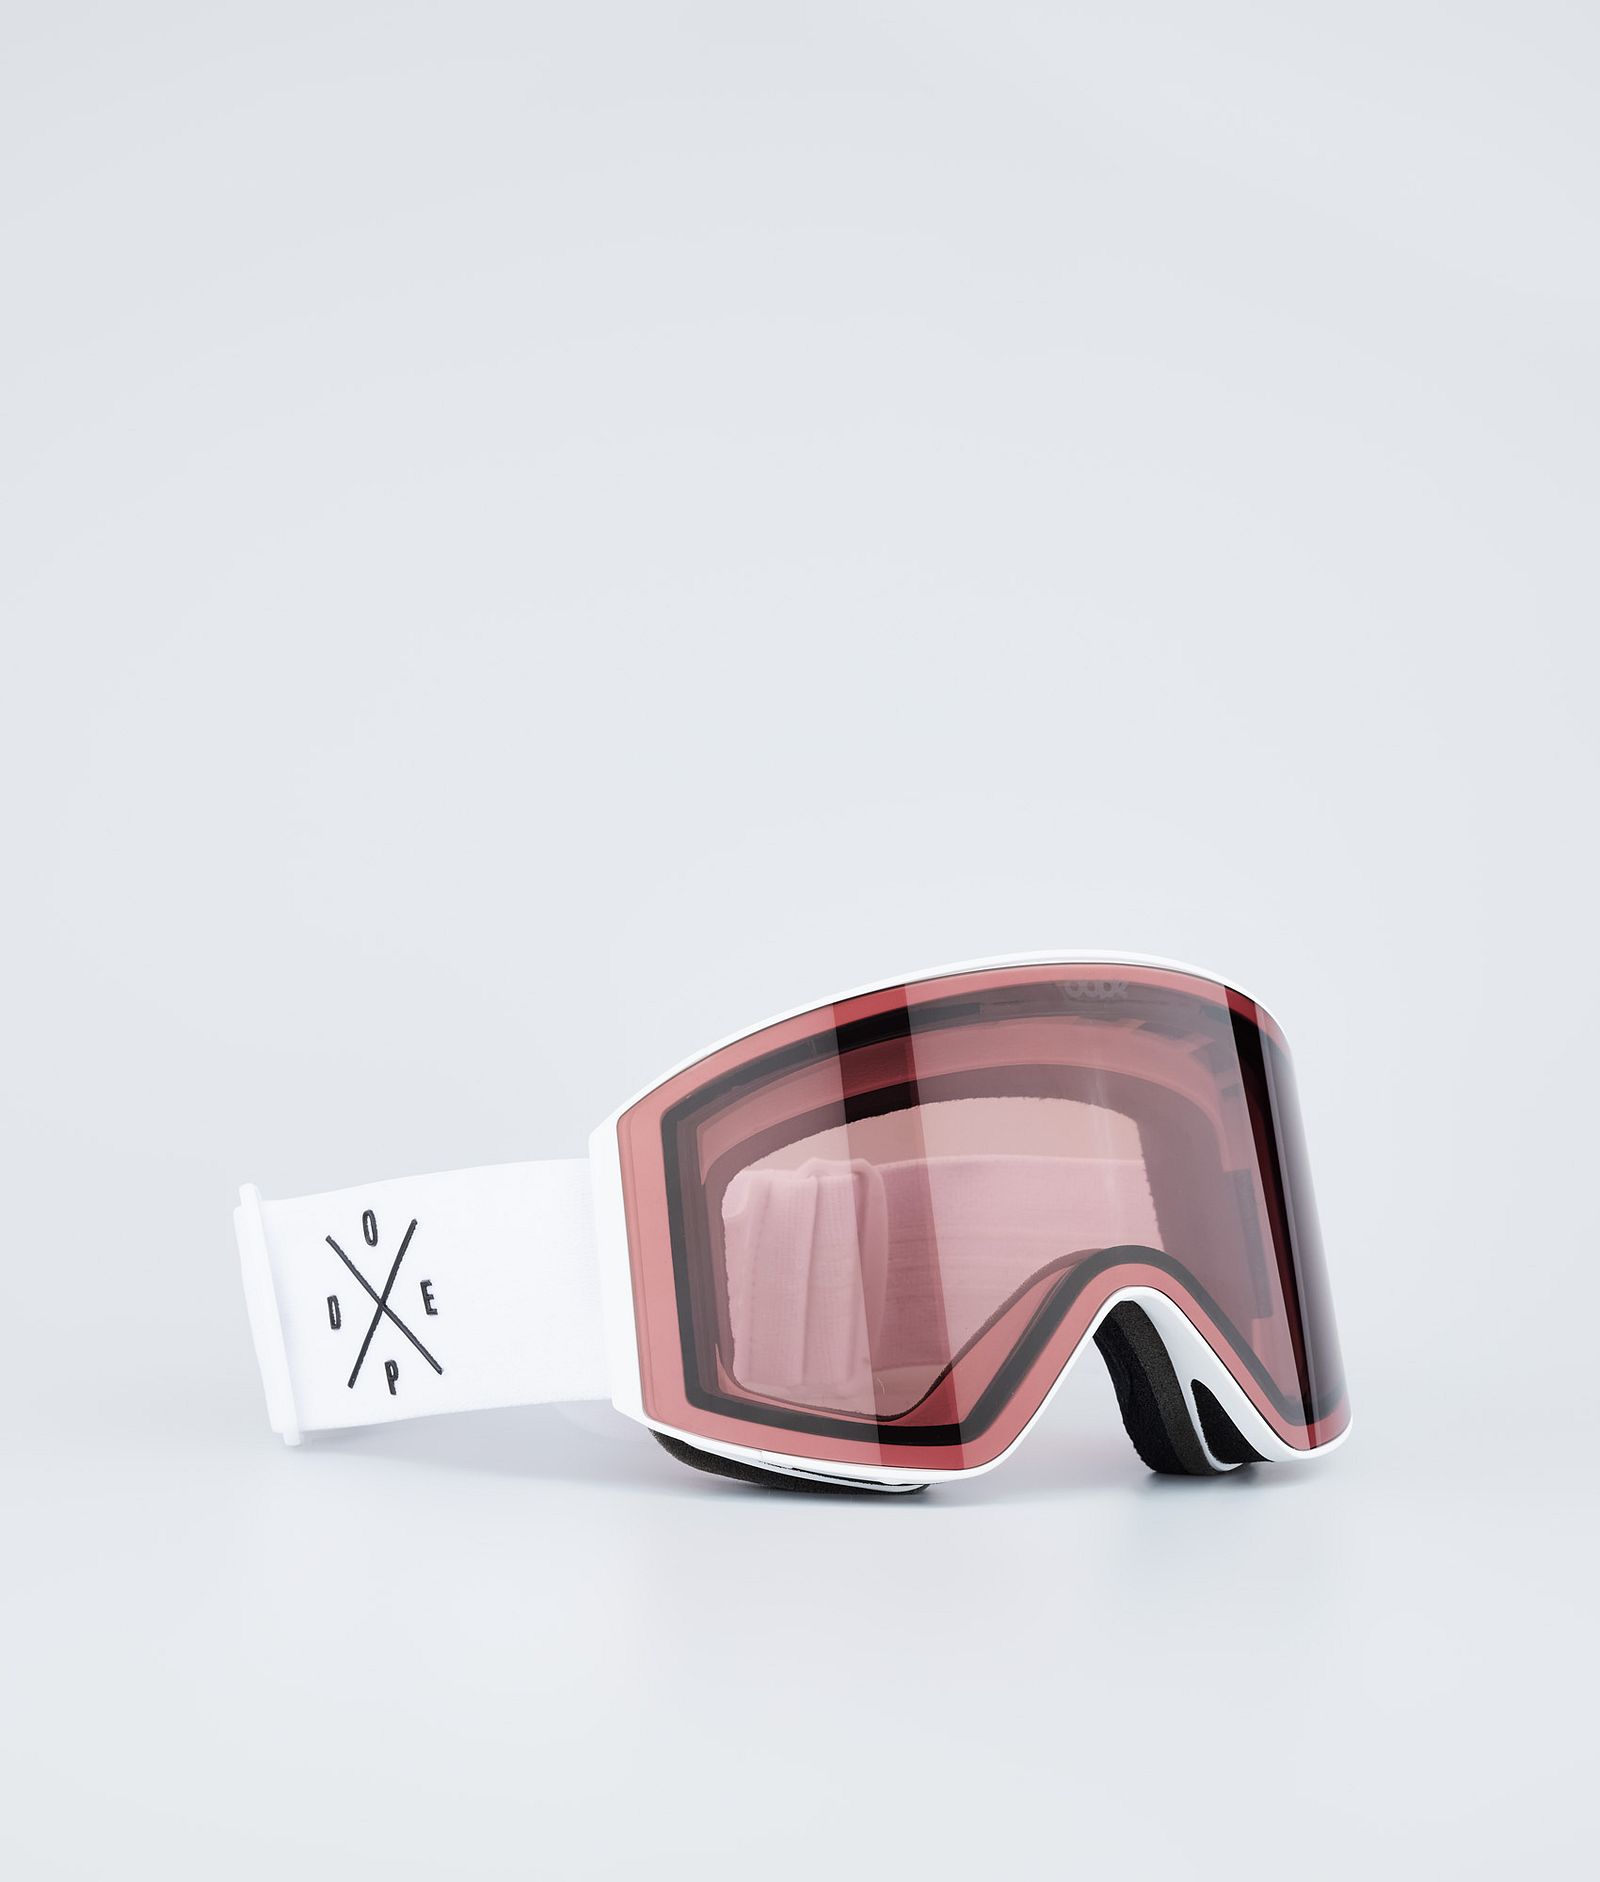 Dope Sight Goggle Lens Replacement Lens Ski Red Brown